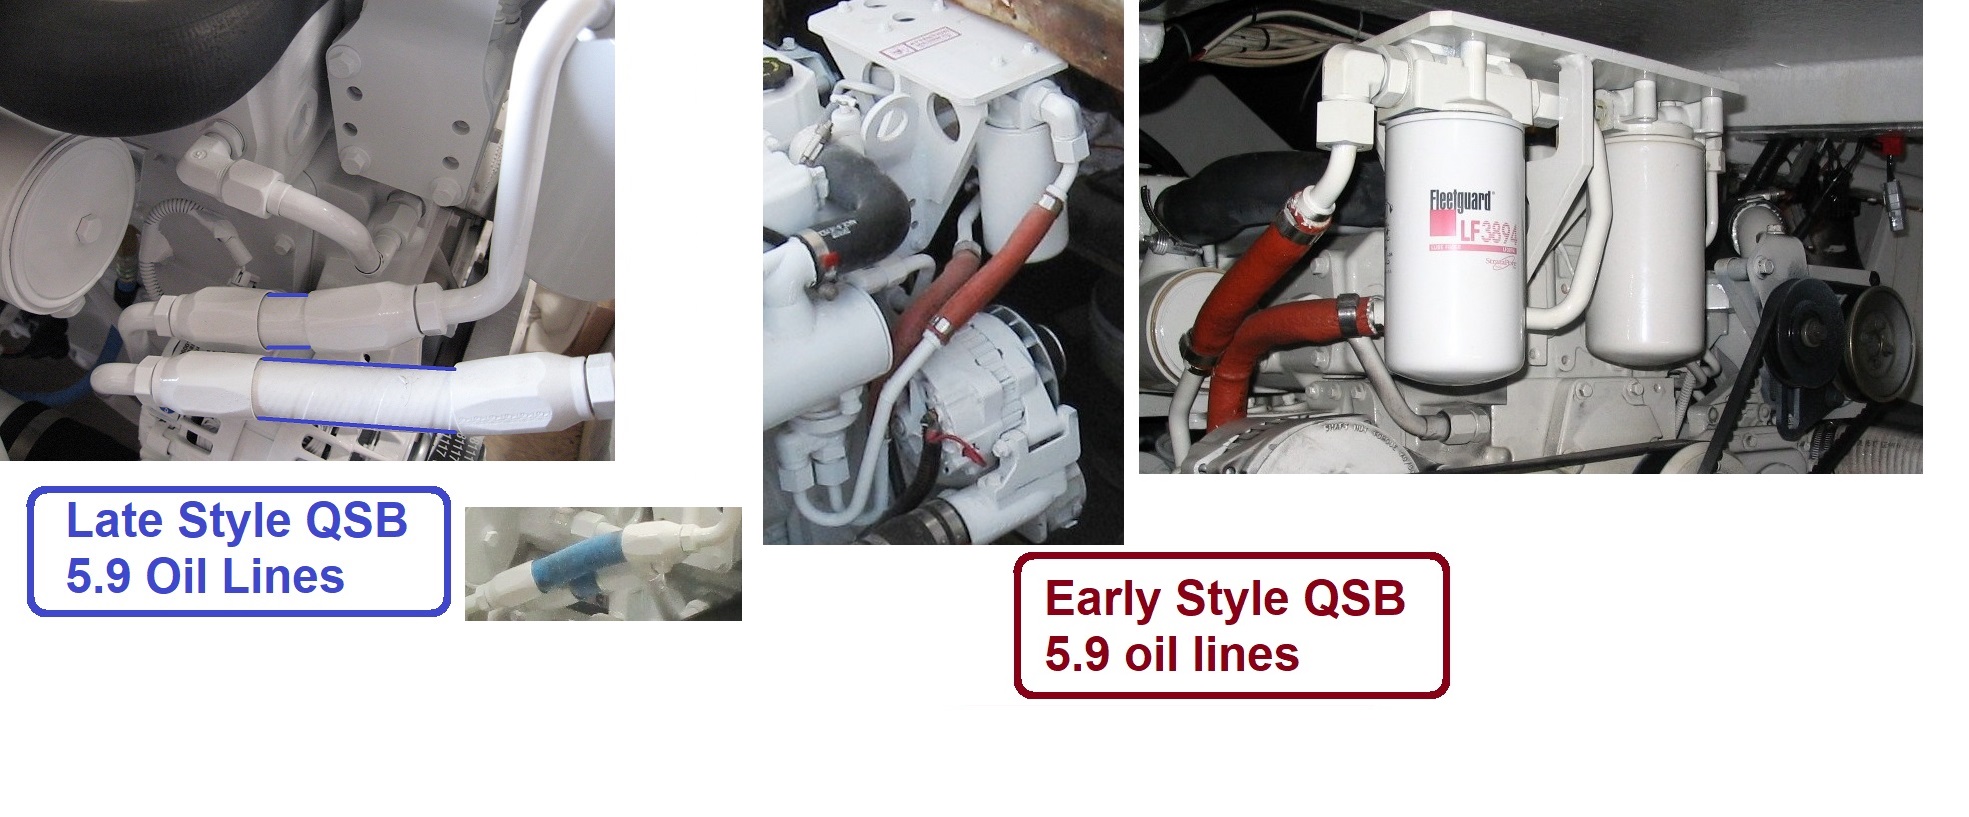 Late Style vs Early Style QSB 5.9 Oil lines